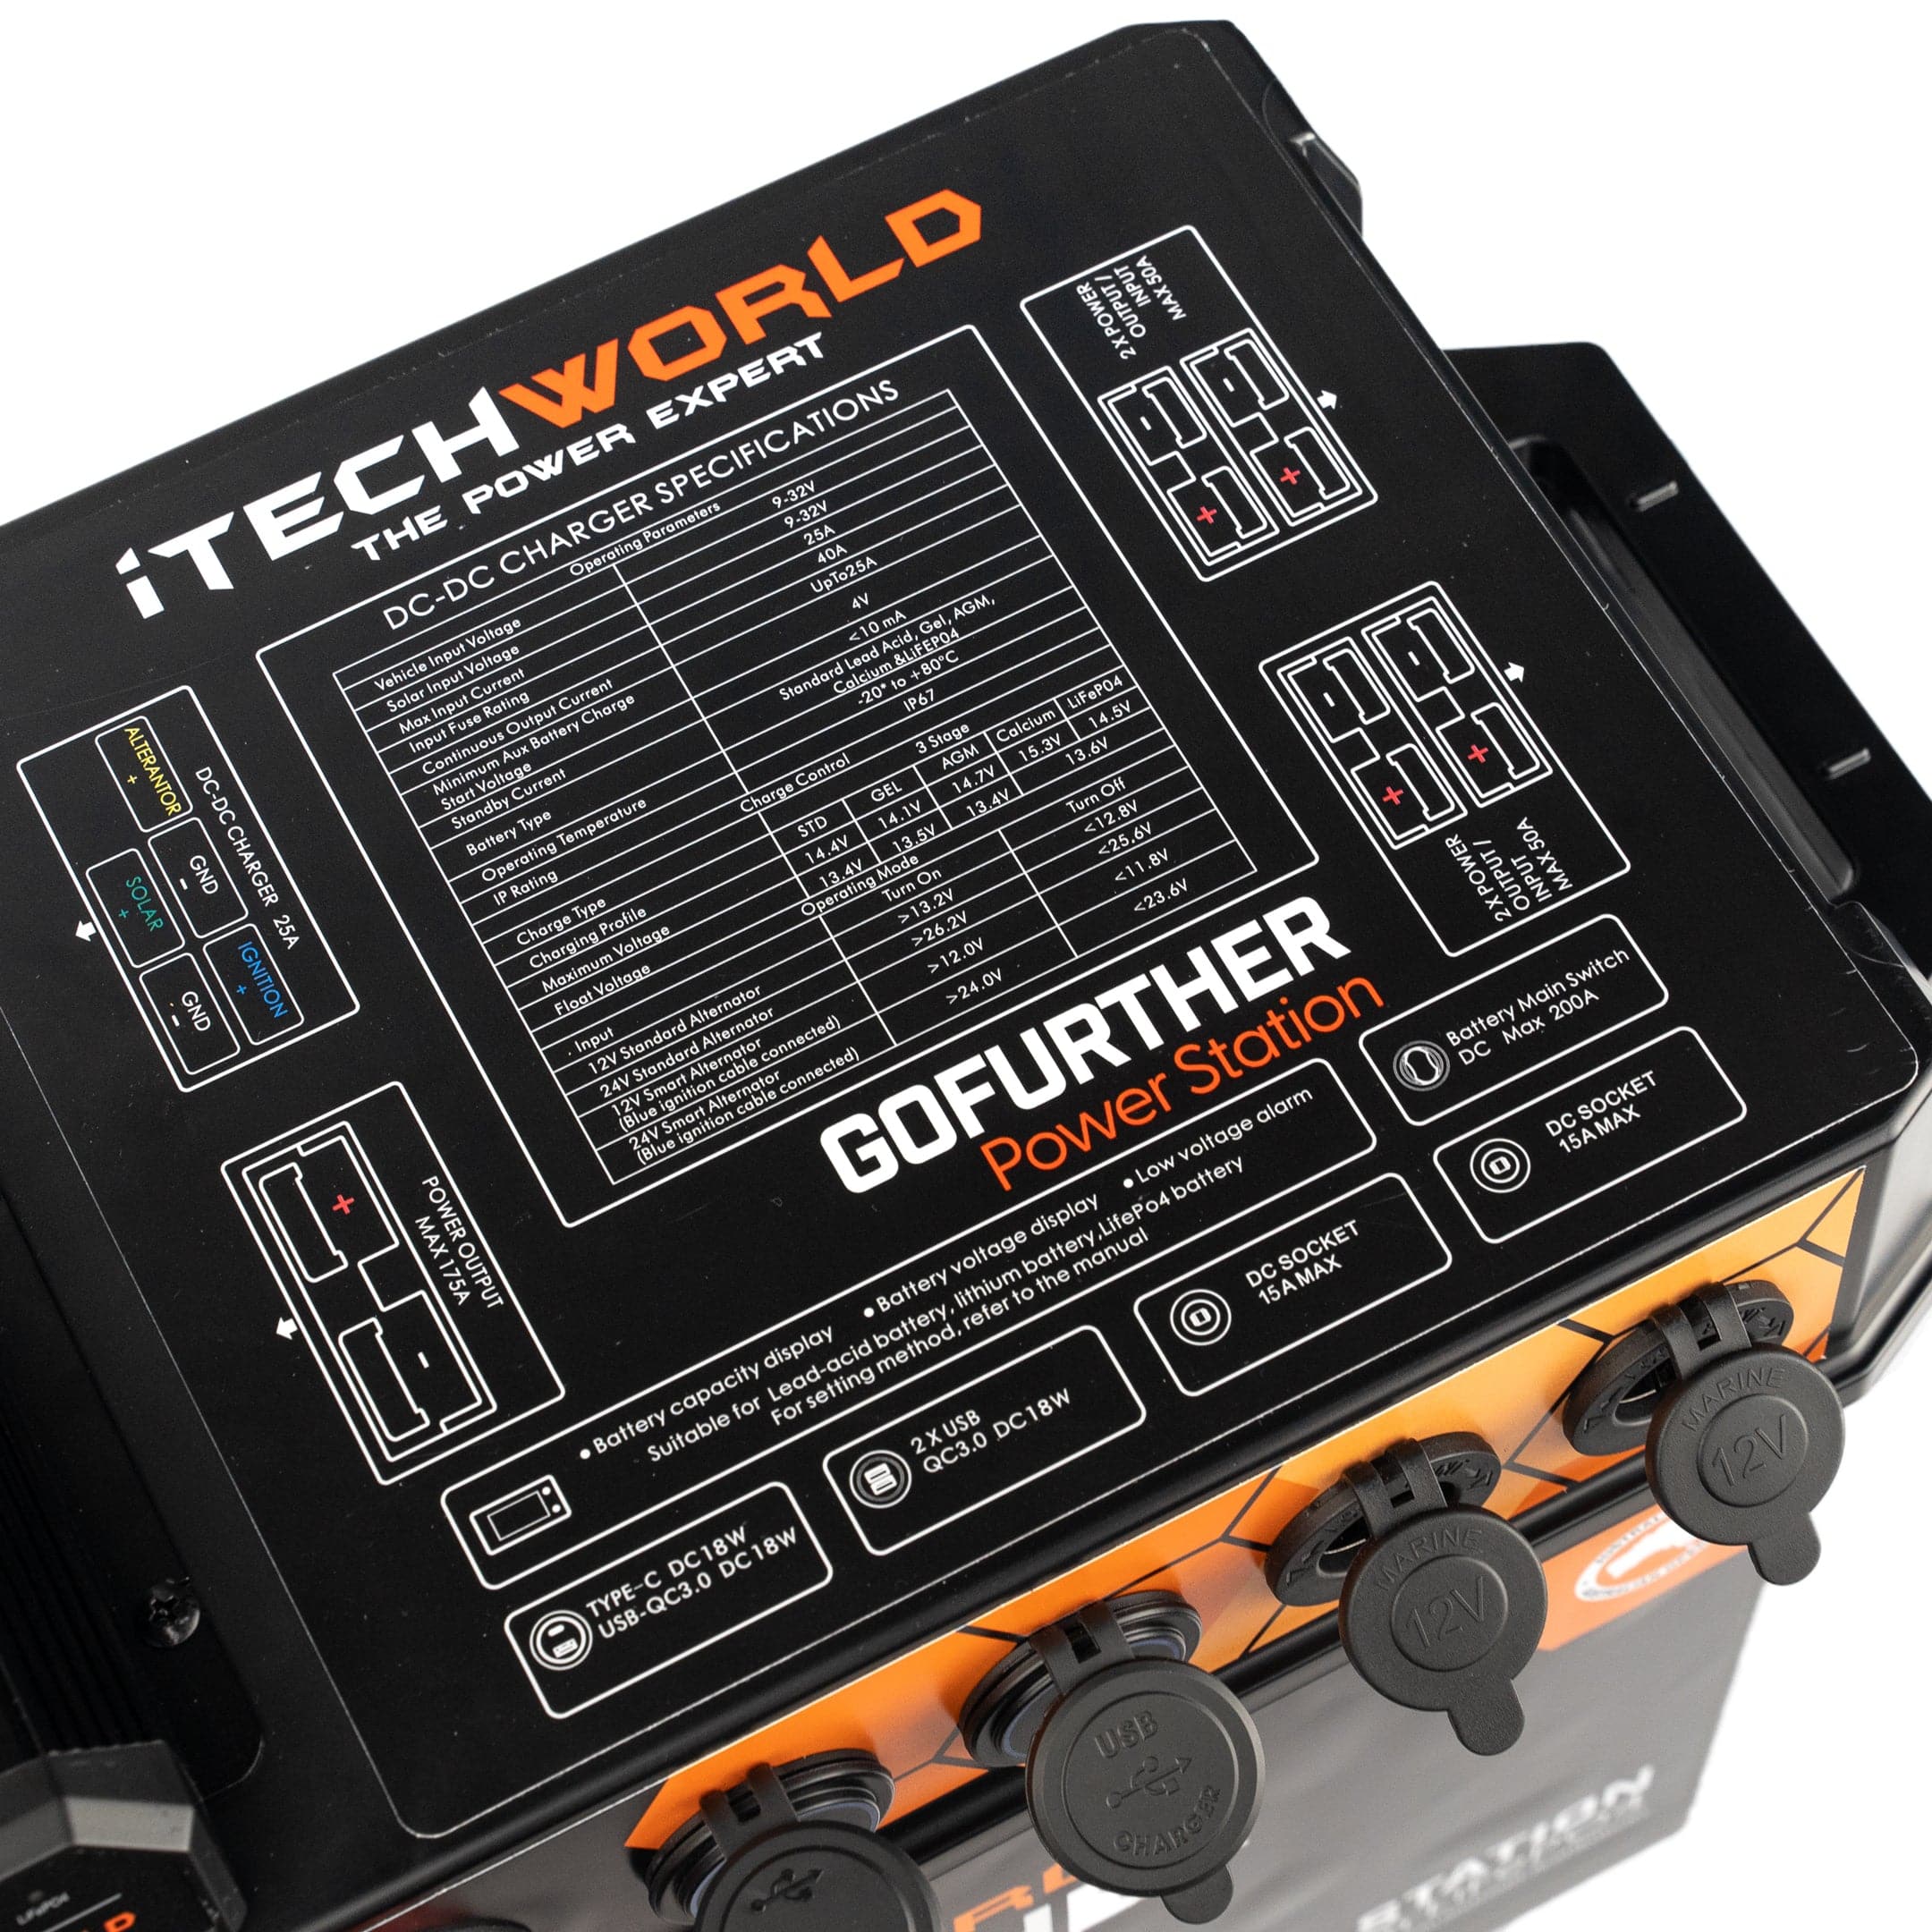 GoFurther Battery Box Power Station with integrated iTECHDCDC25 - iTechworld